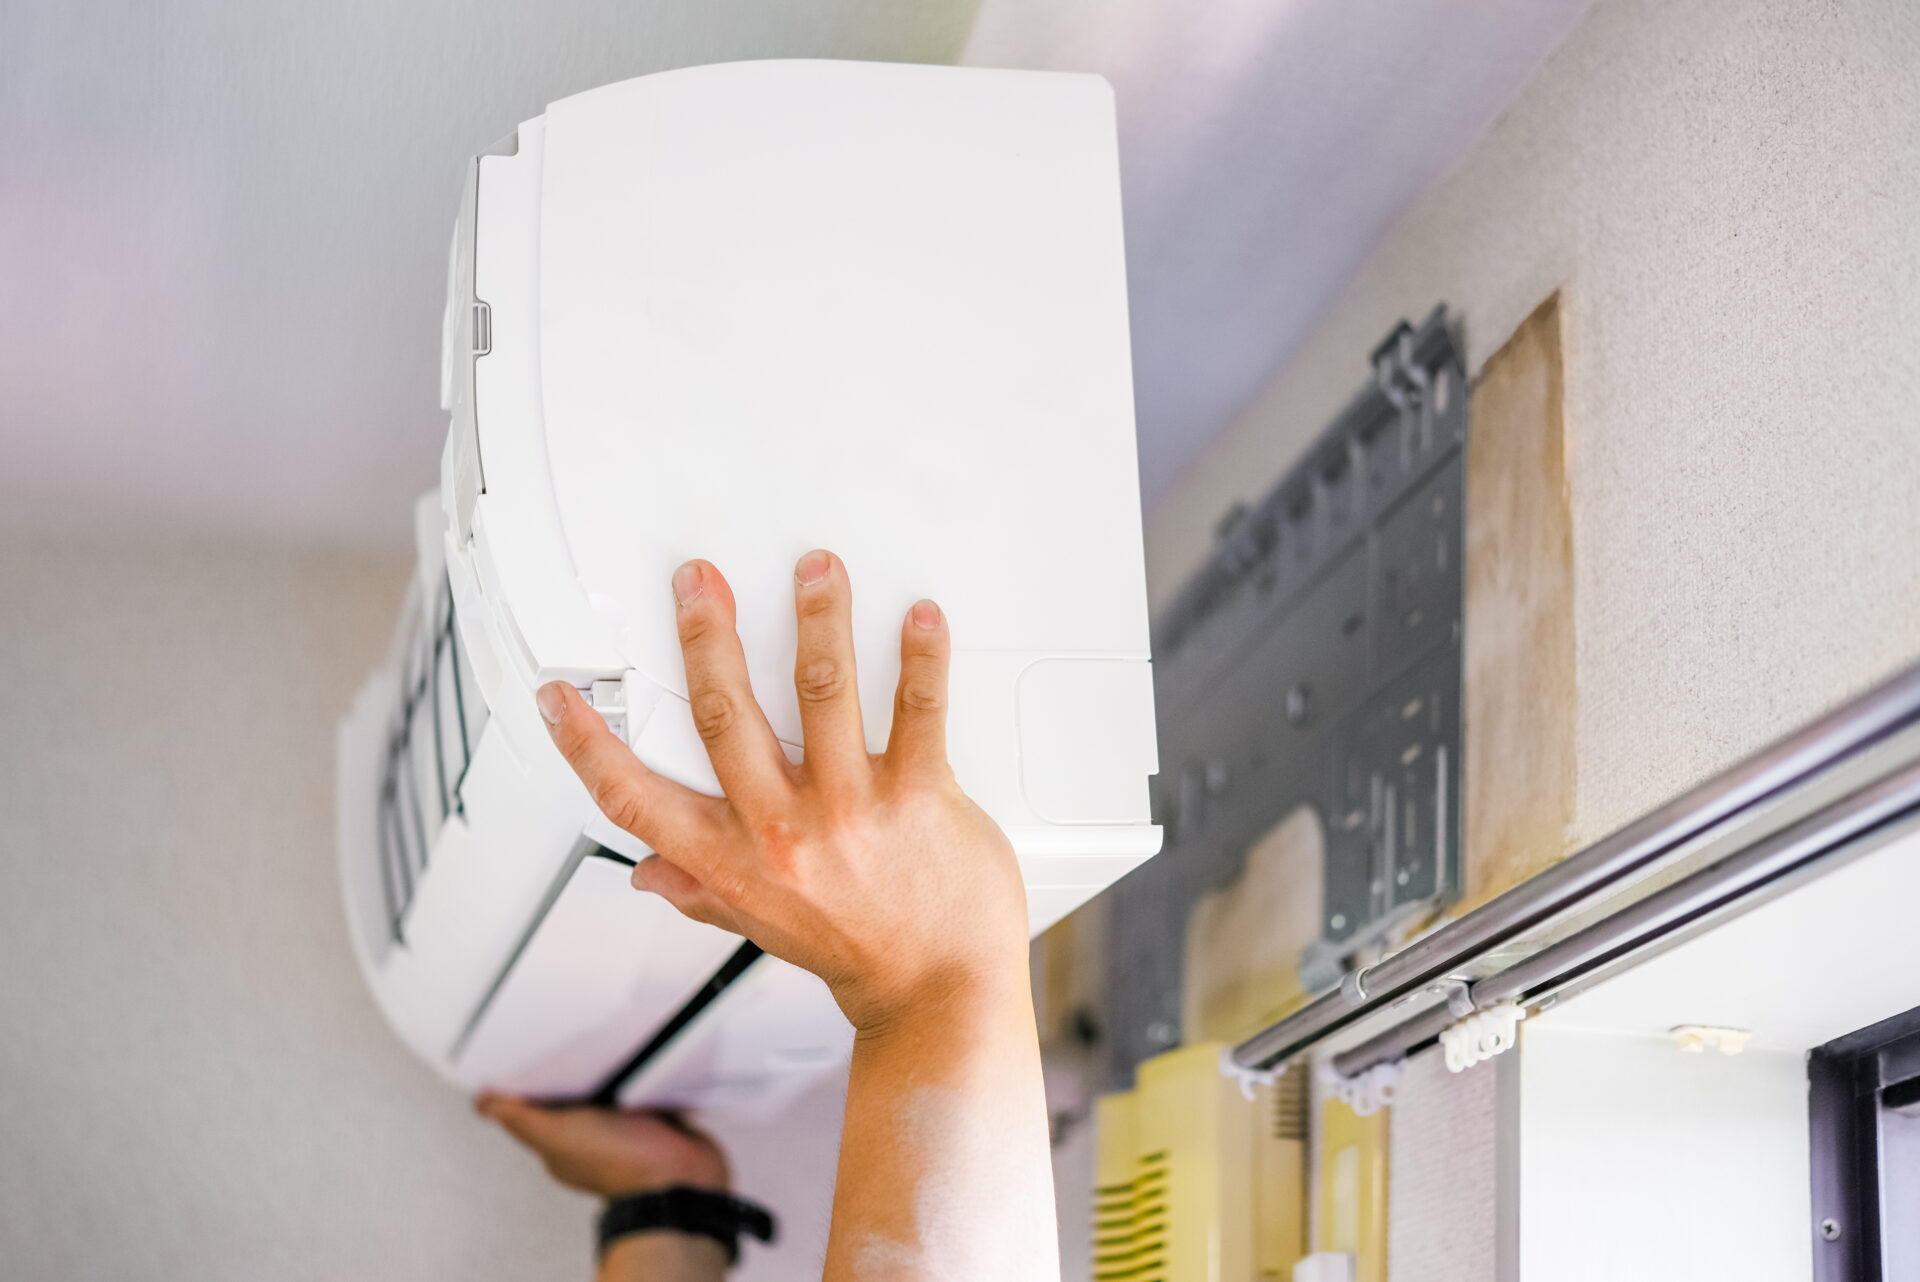 Male hands with a black watch on the left hand holding a white air conditioner and doing hvac installation